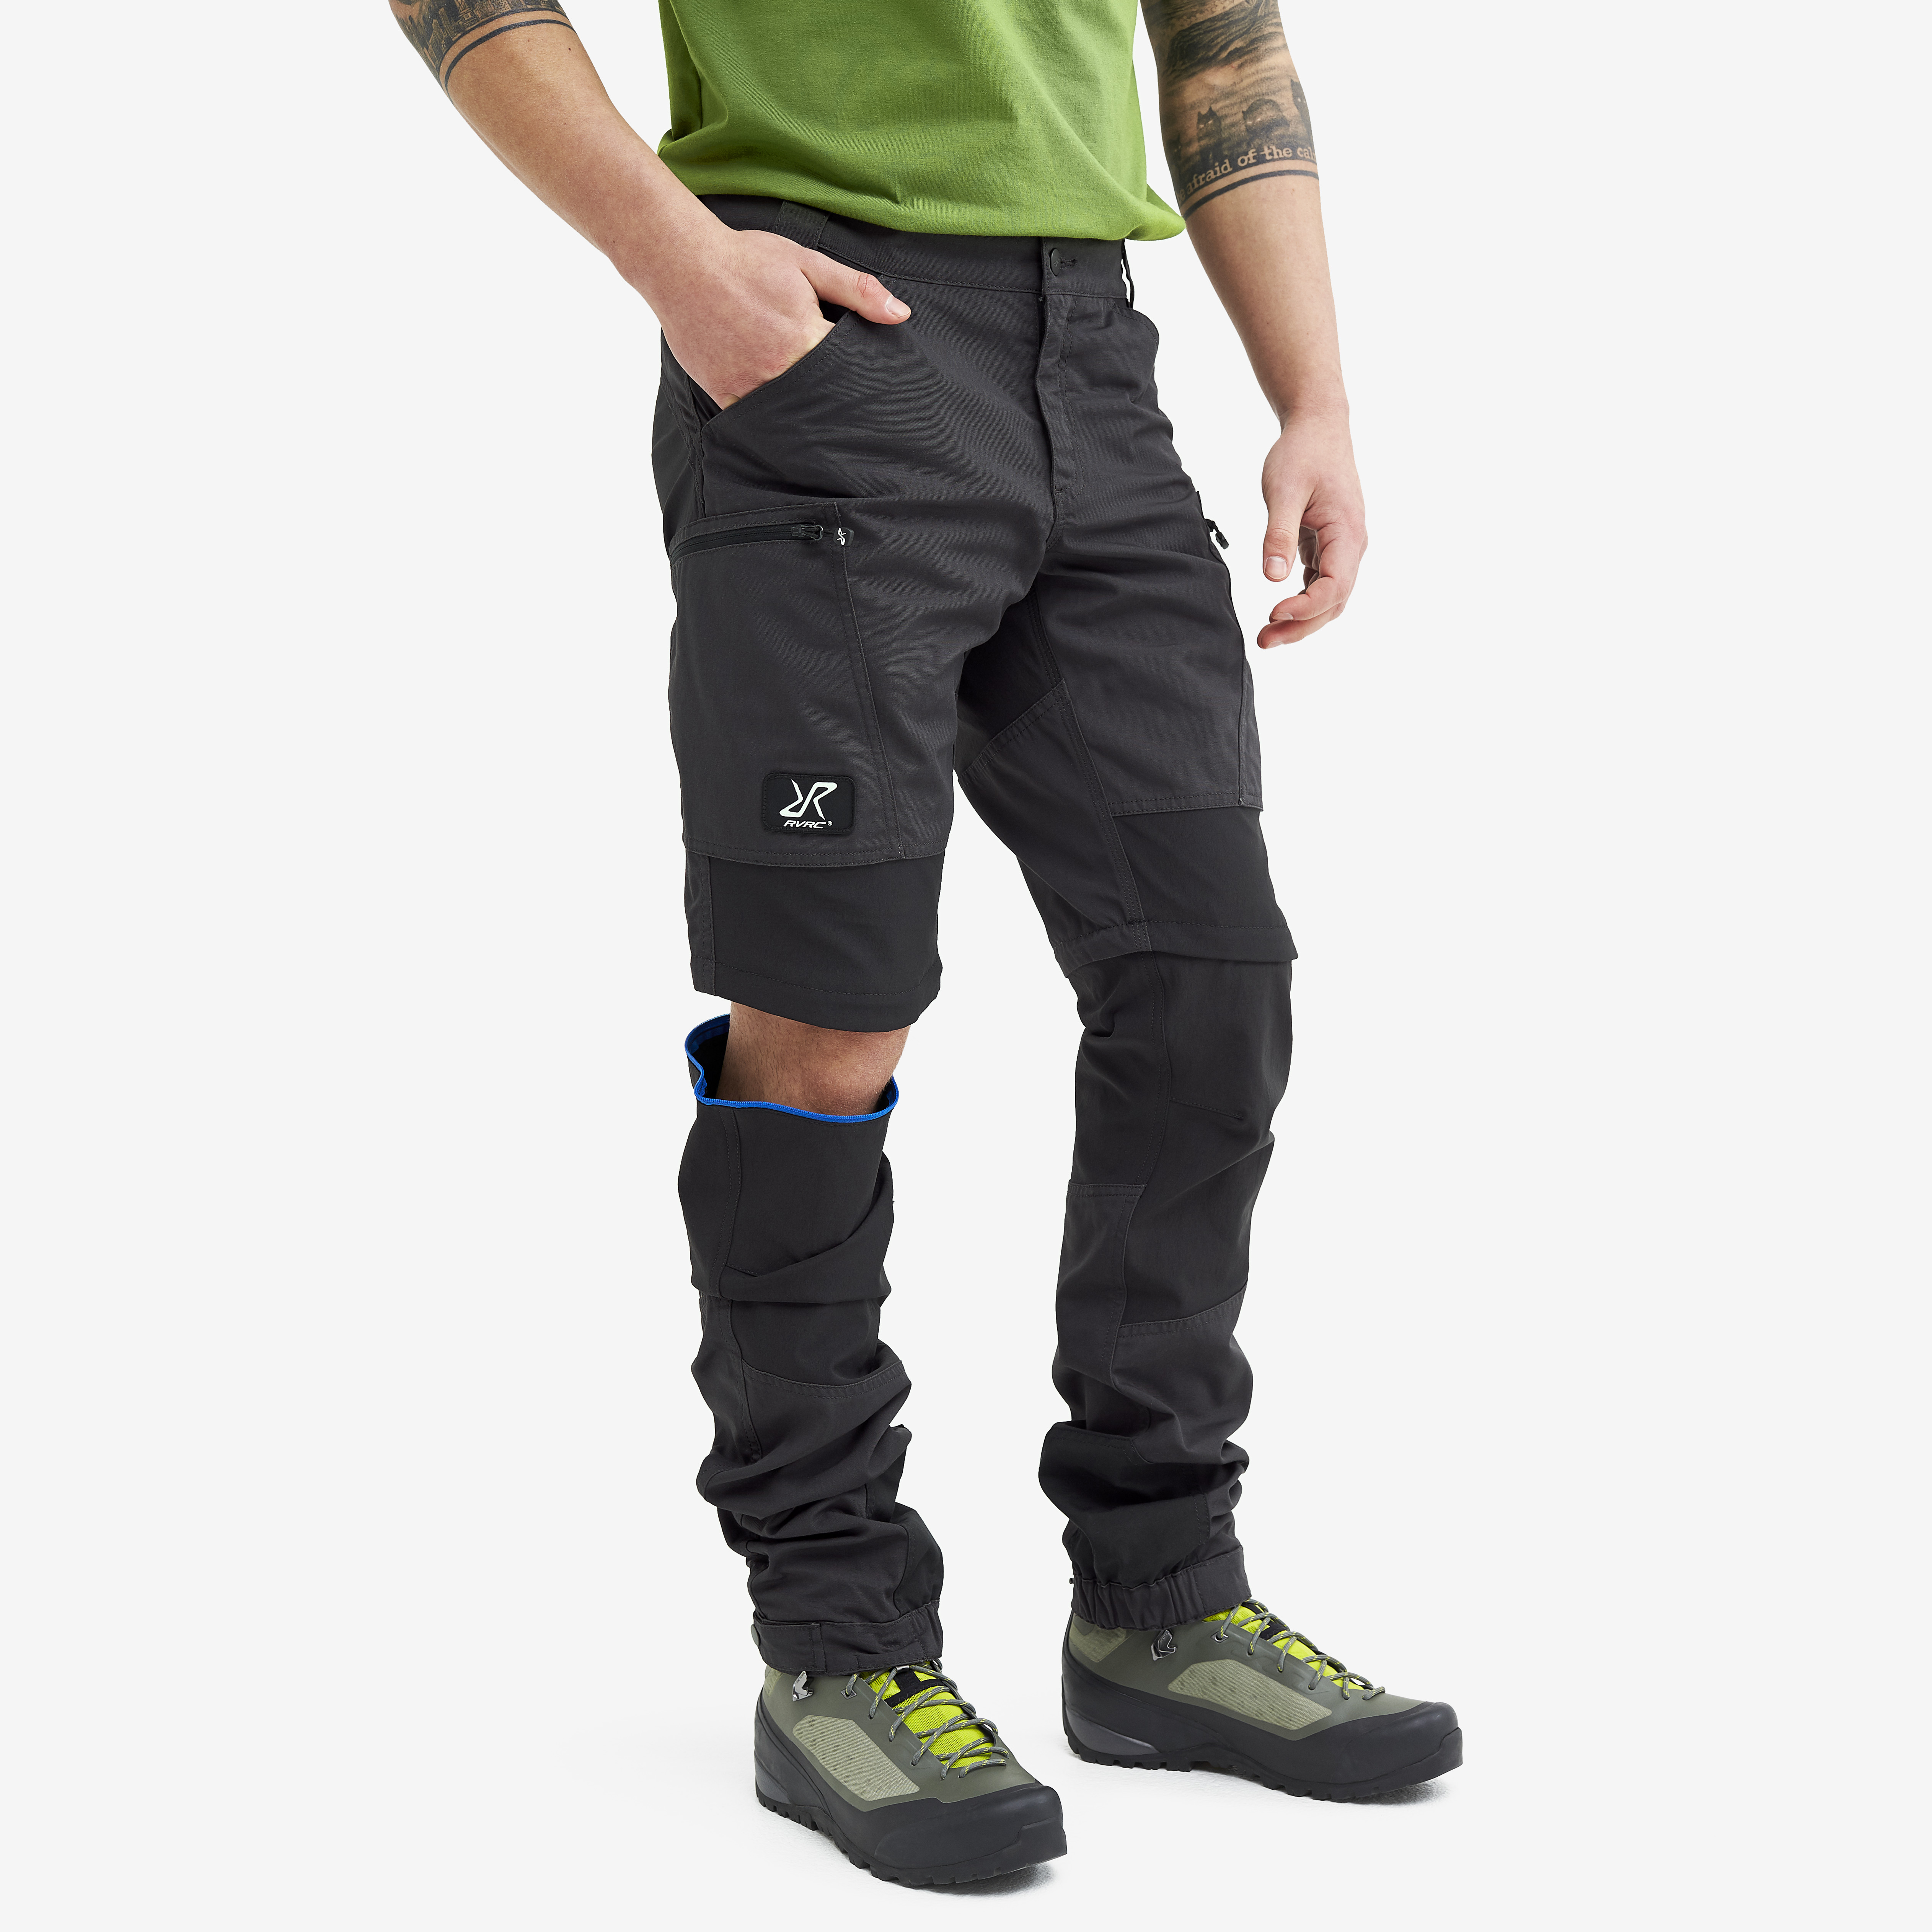 Nordwand Pro Zip-off Pants Anthracite Men